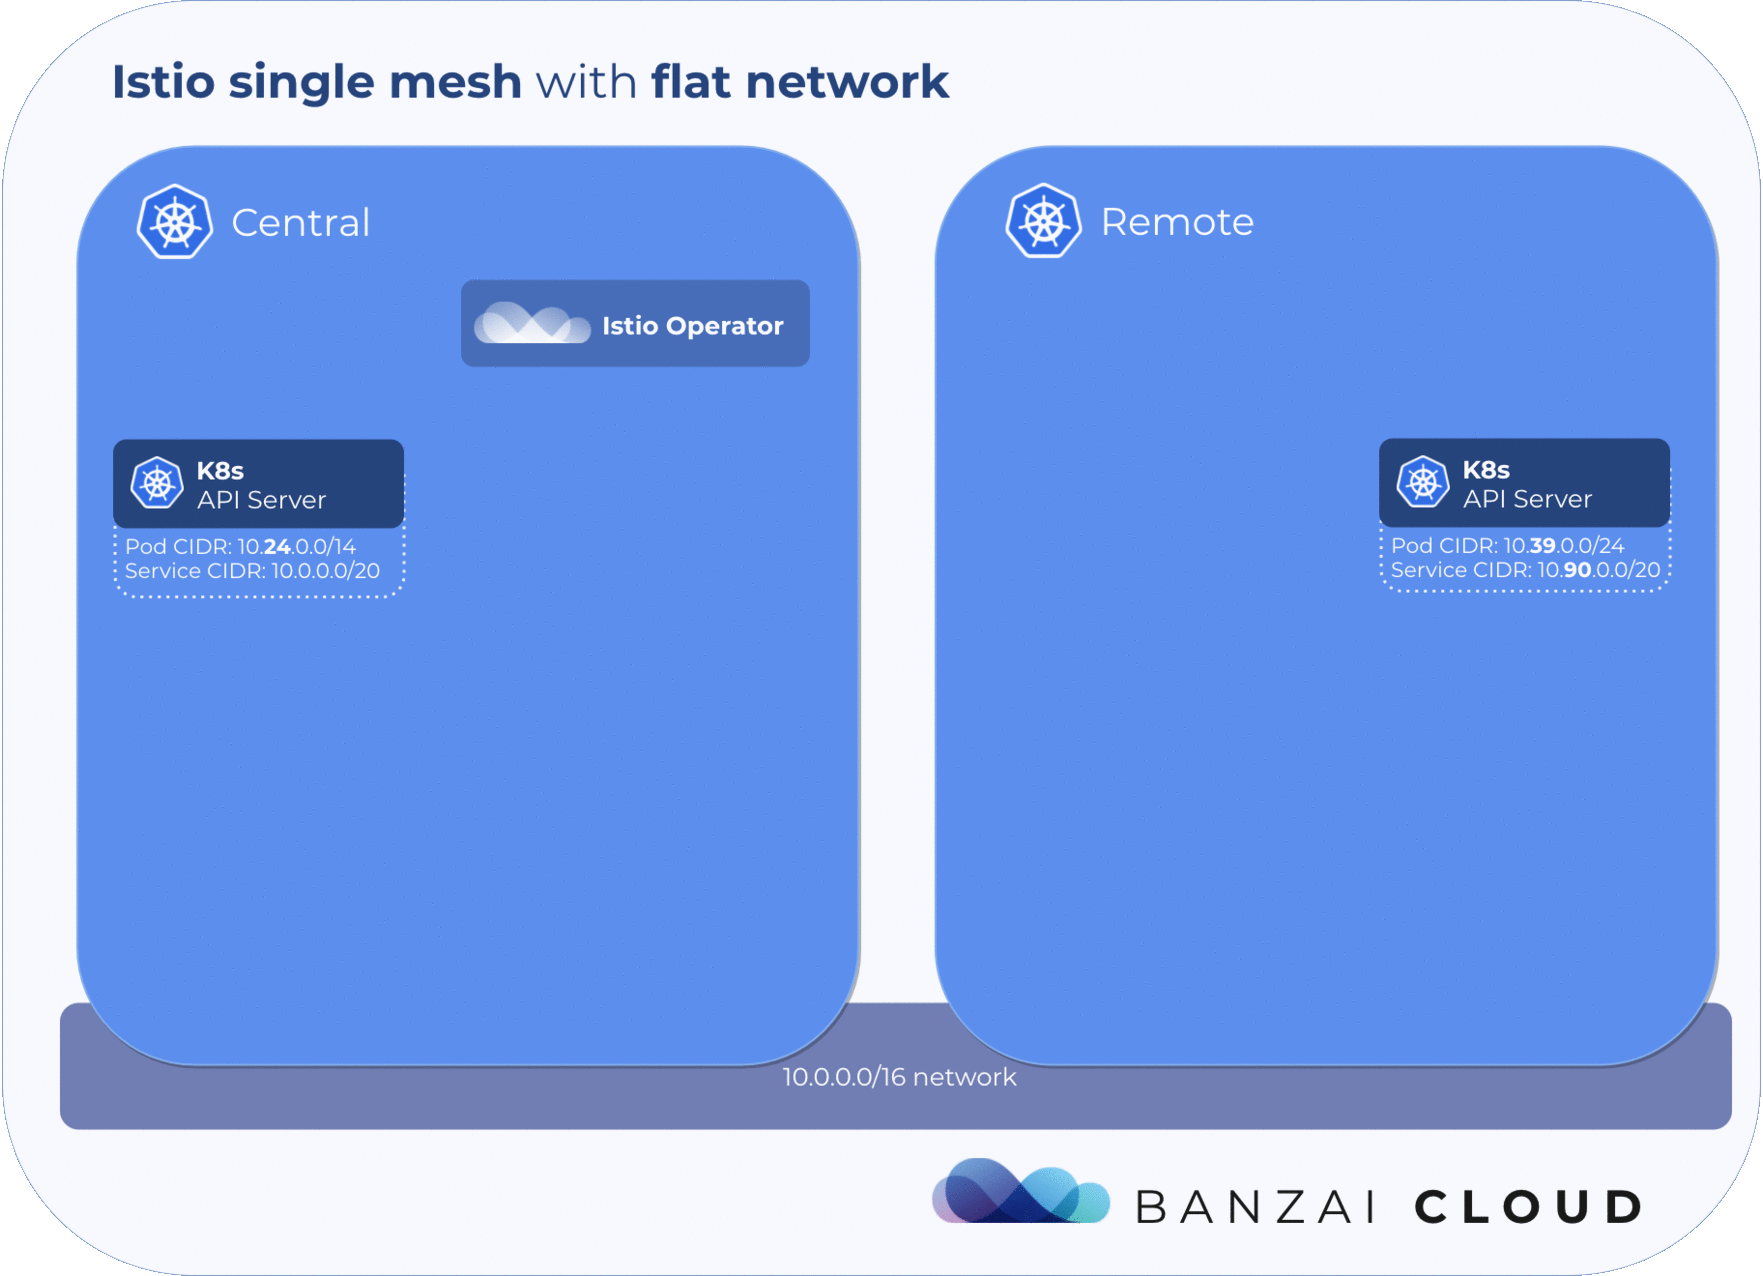 Multi-cluster with flat network